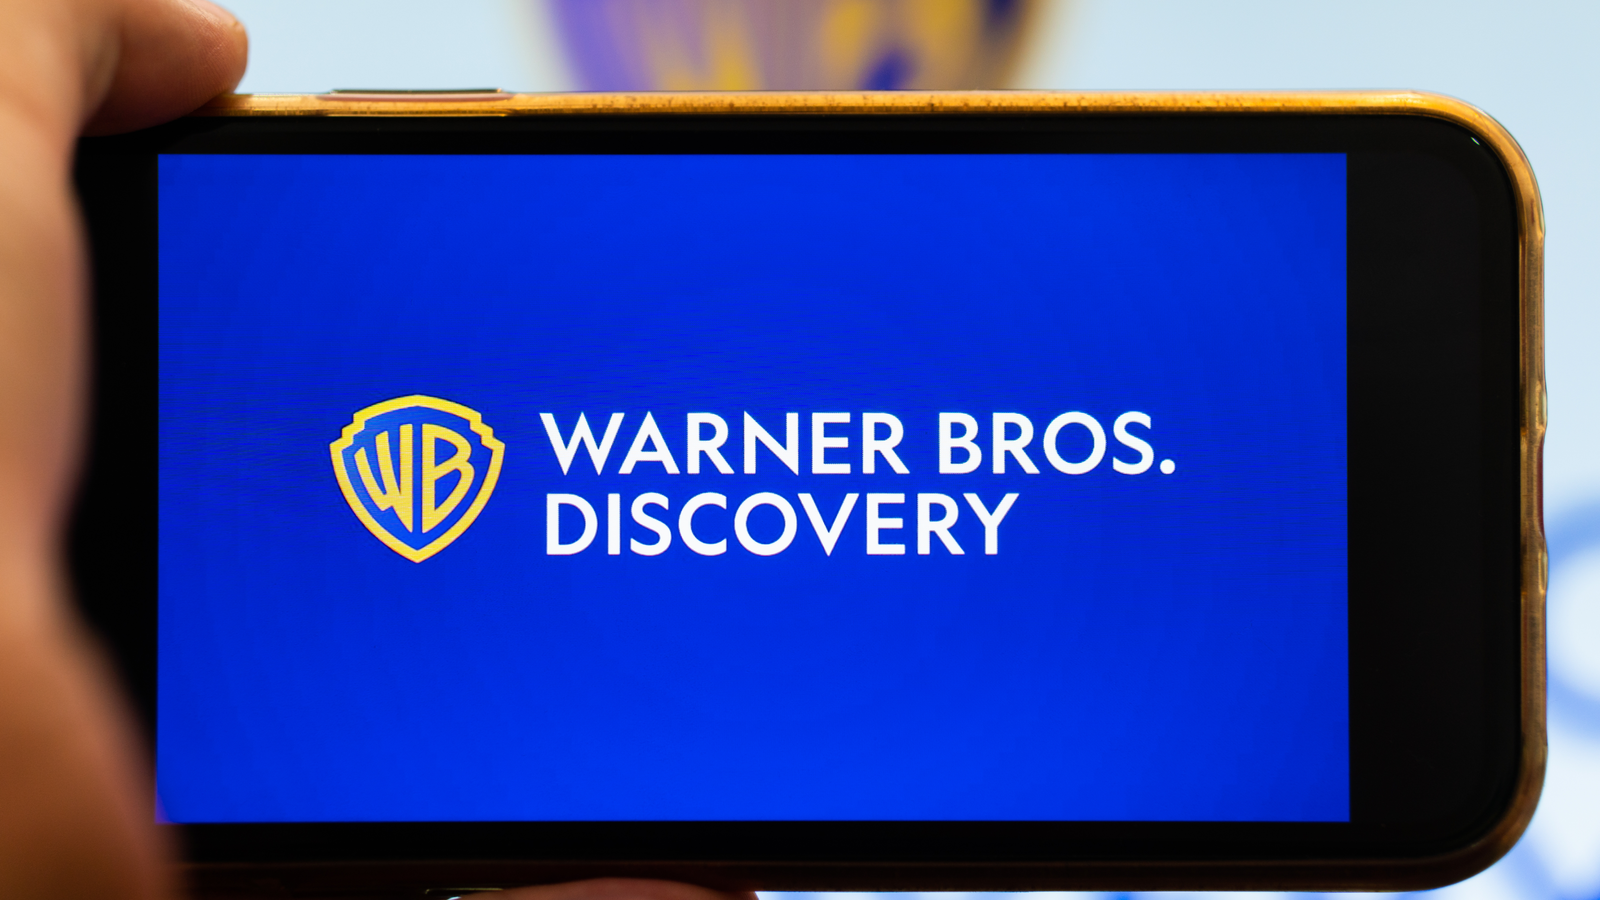 The logo of the new Warner Bros Discovery company on smartphone screen.